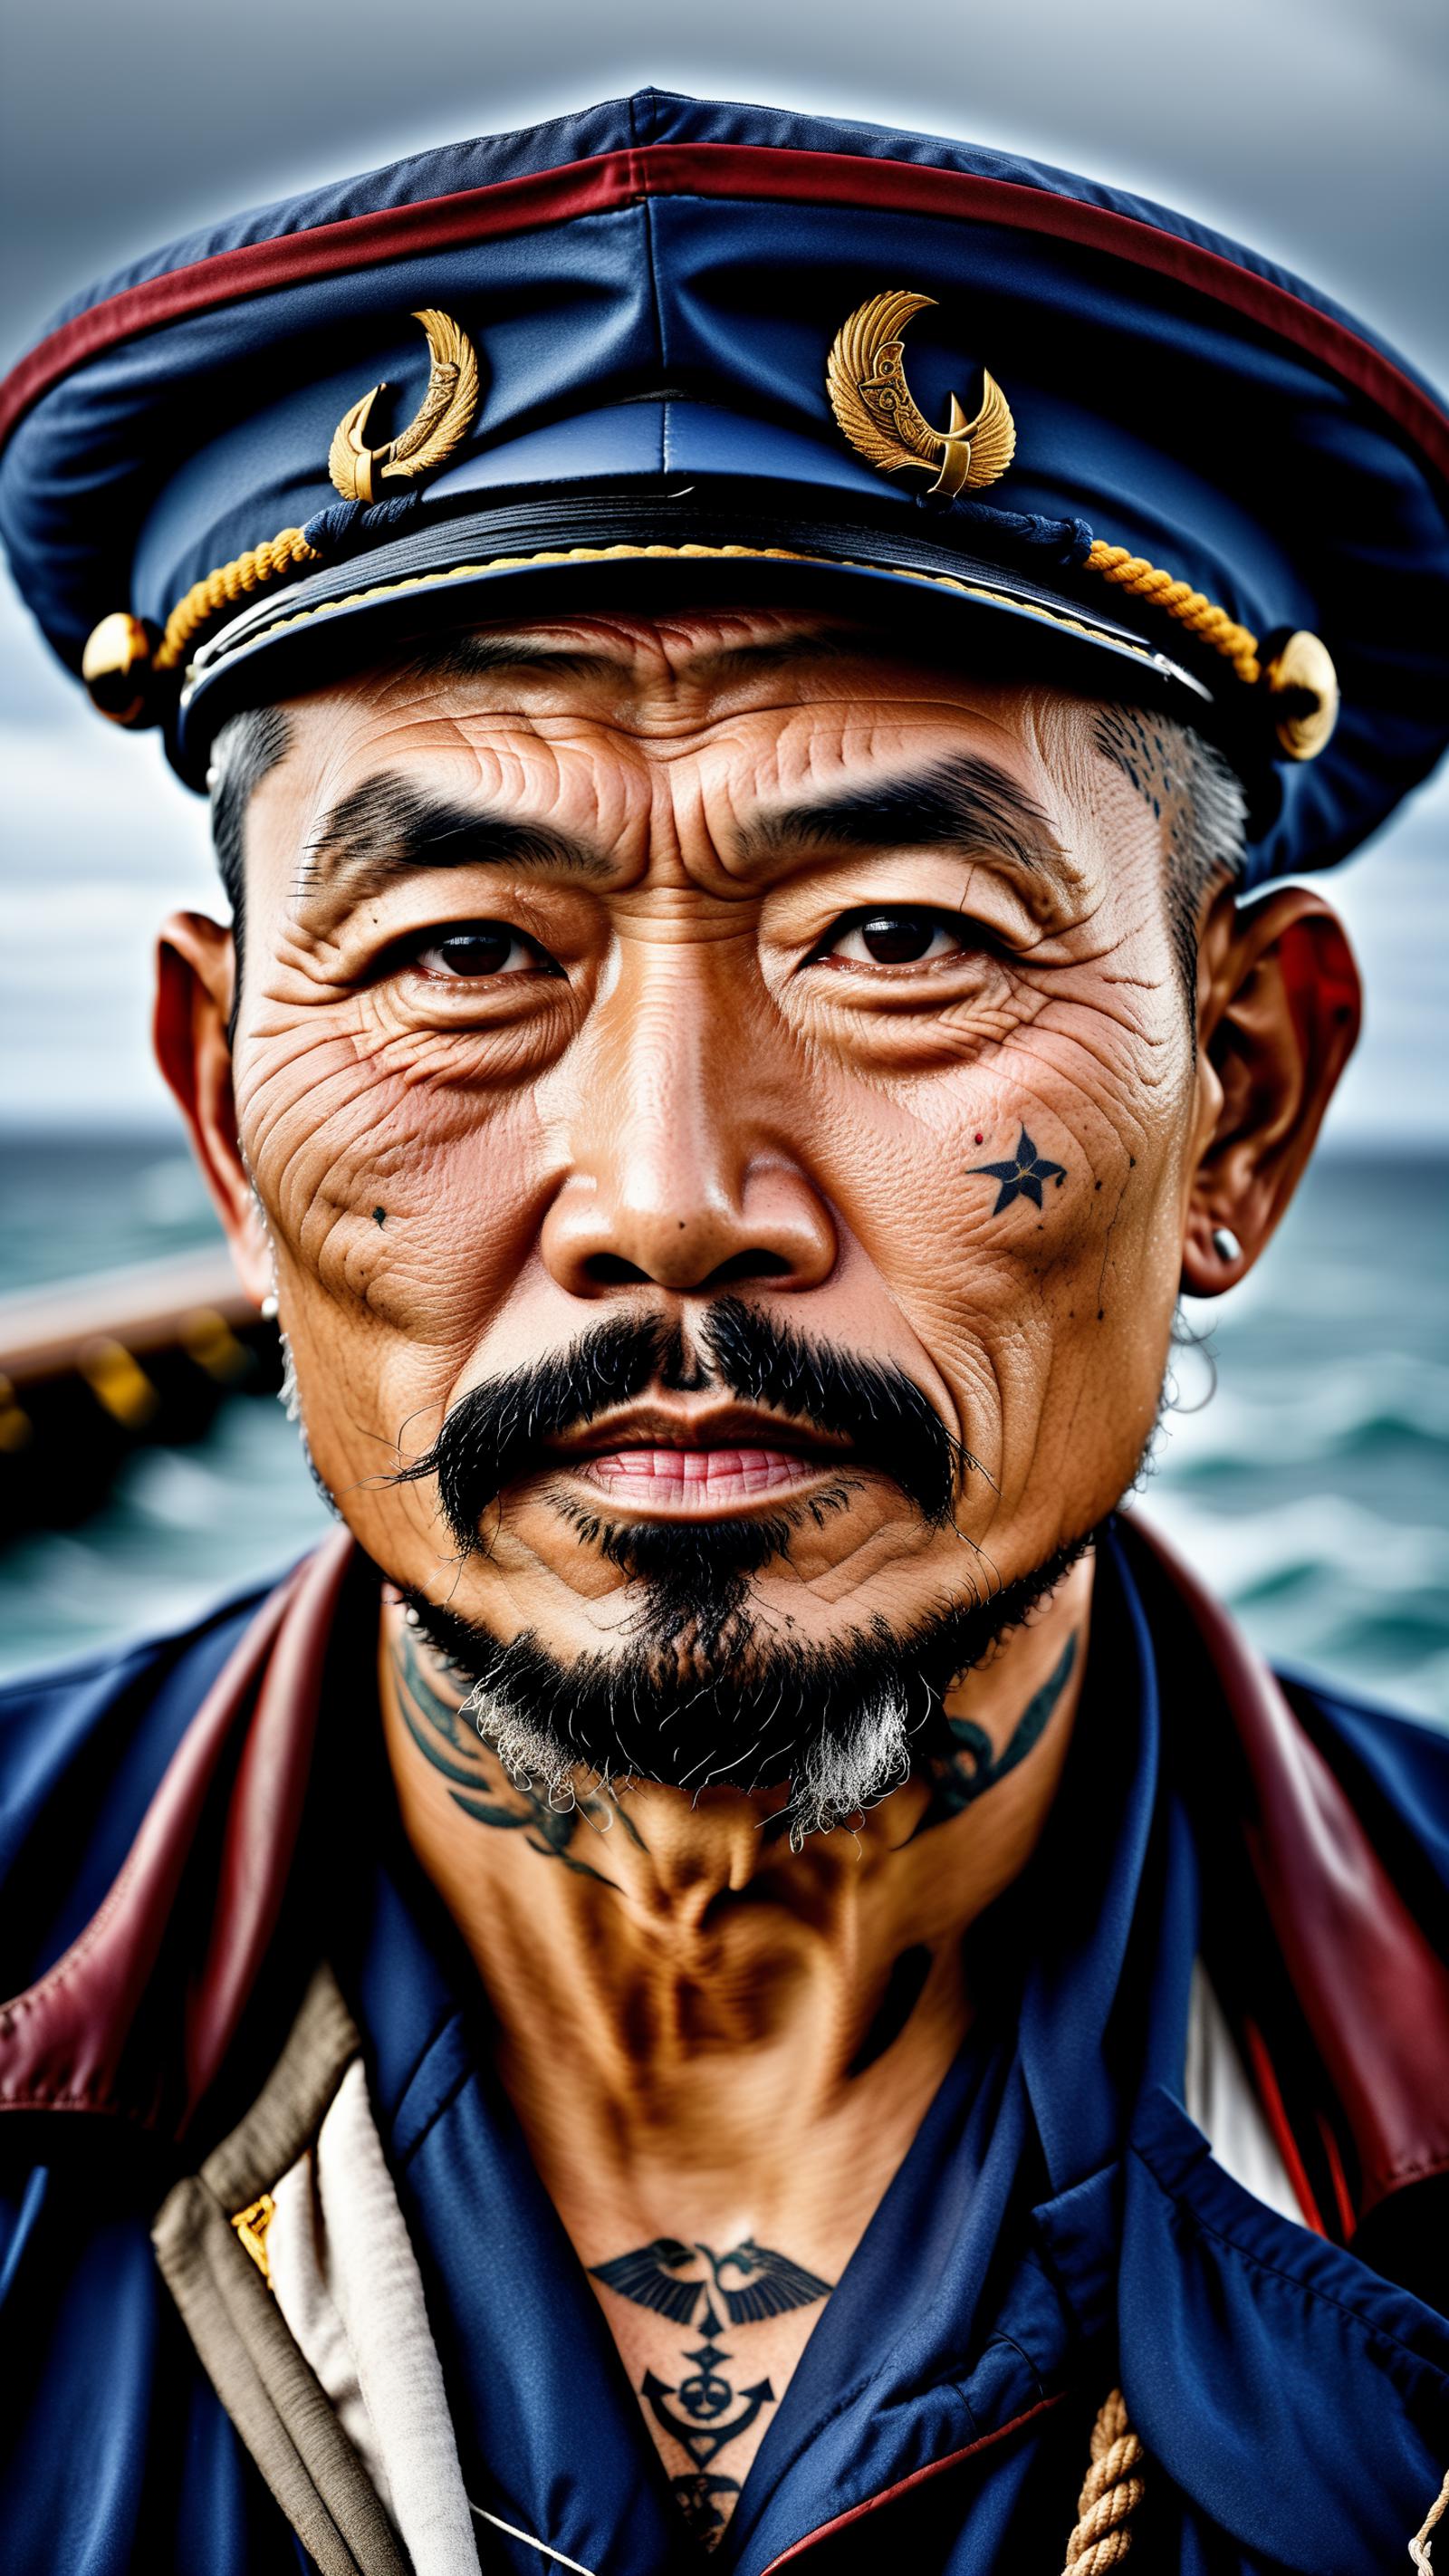 An Asian man with a star tattoo on his face and a beard and mustache.